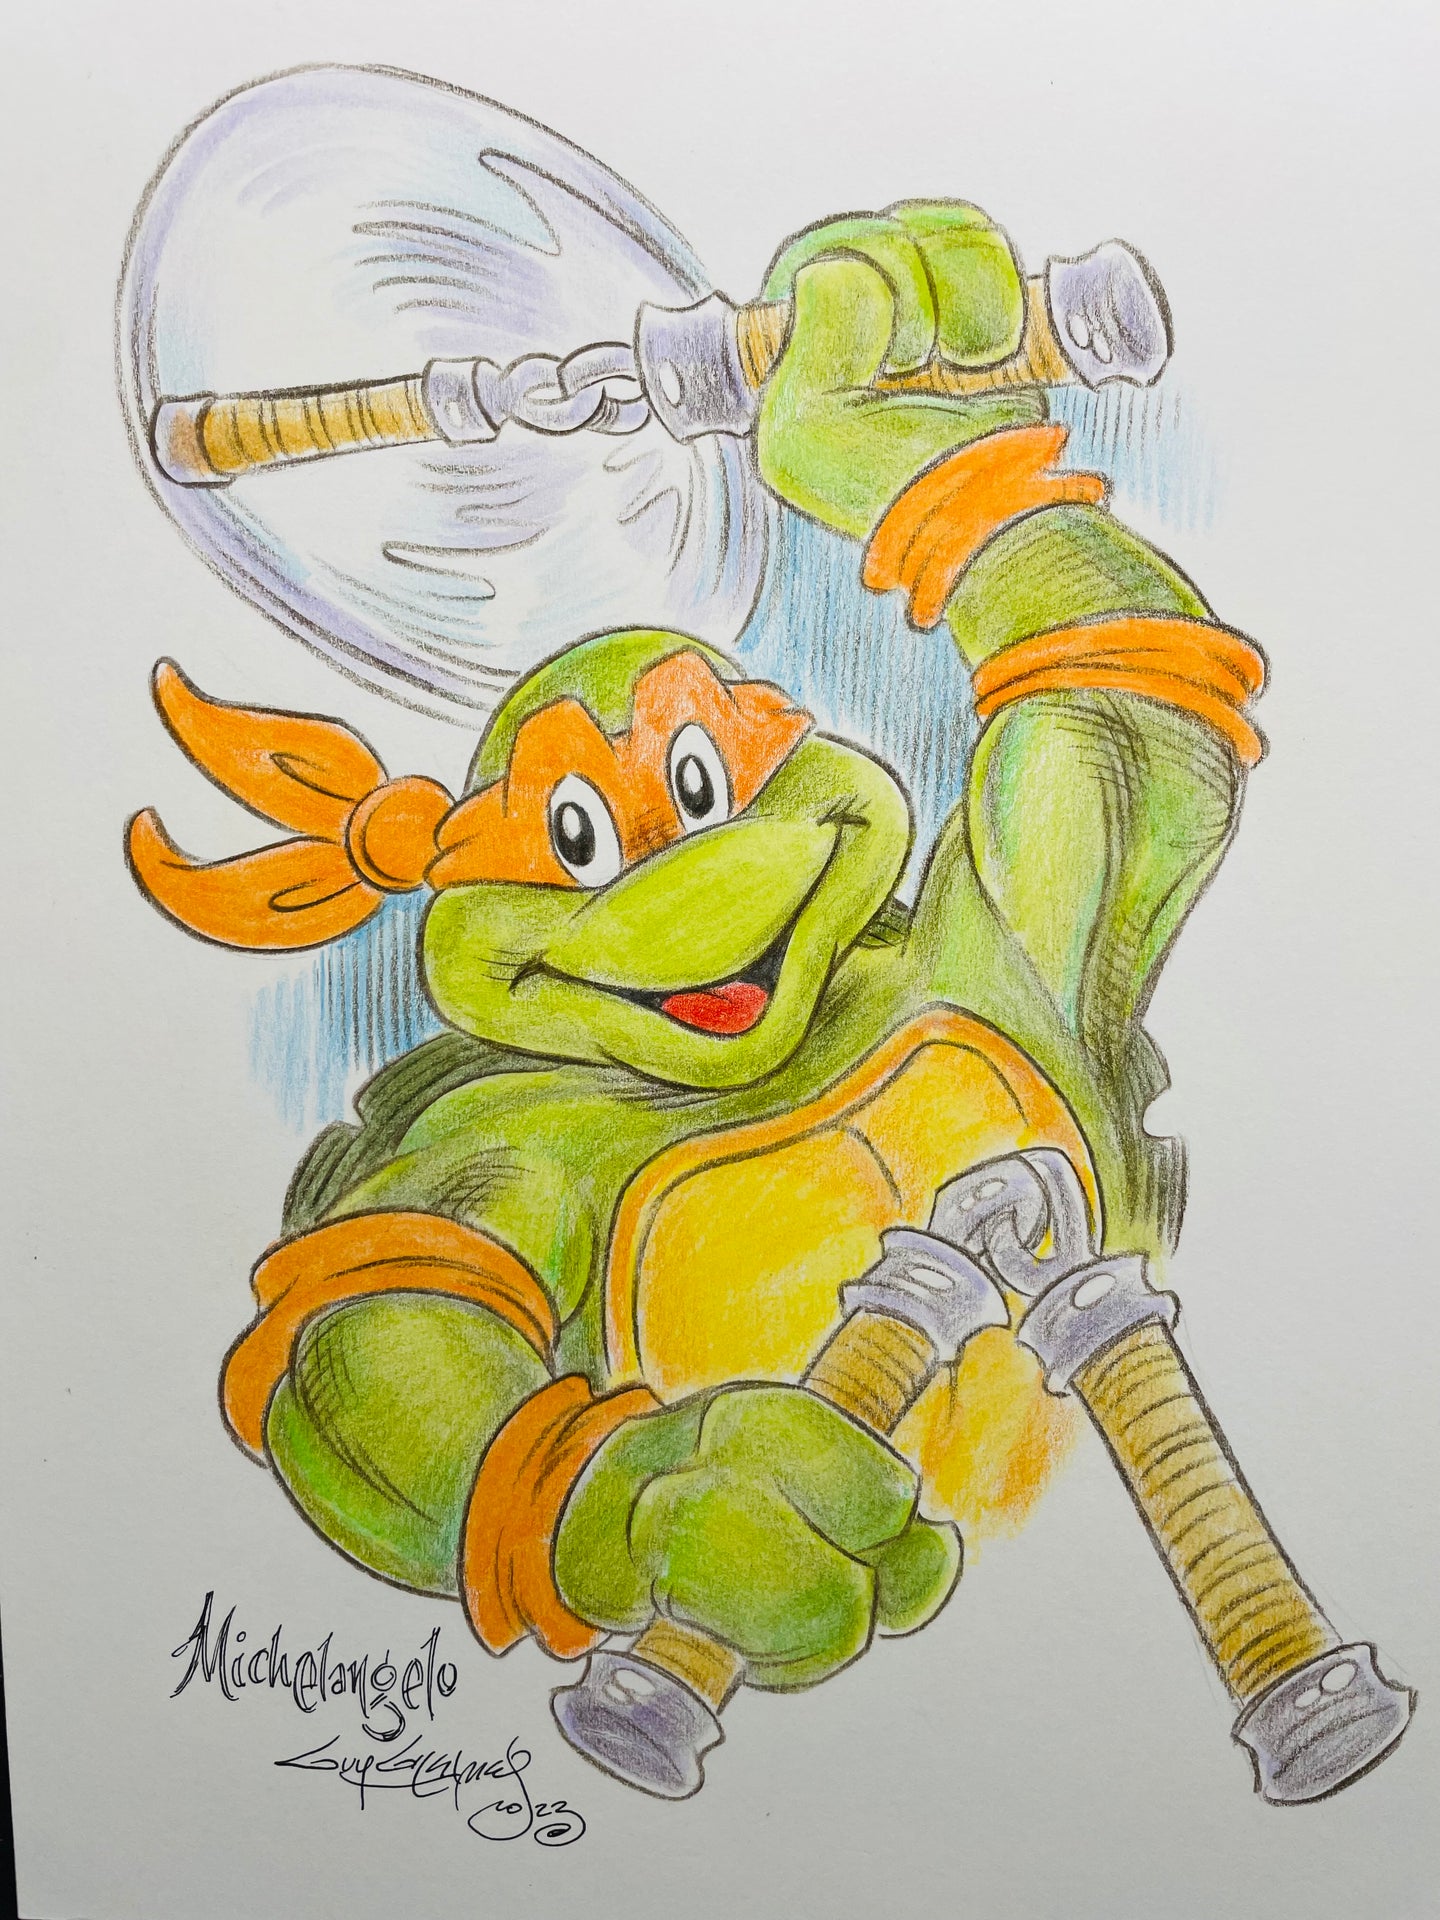 Mikey TMNT Original Art 8.5x11 Sketch  - Created by Guy Gilchrist